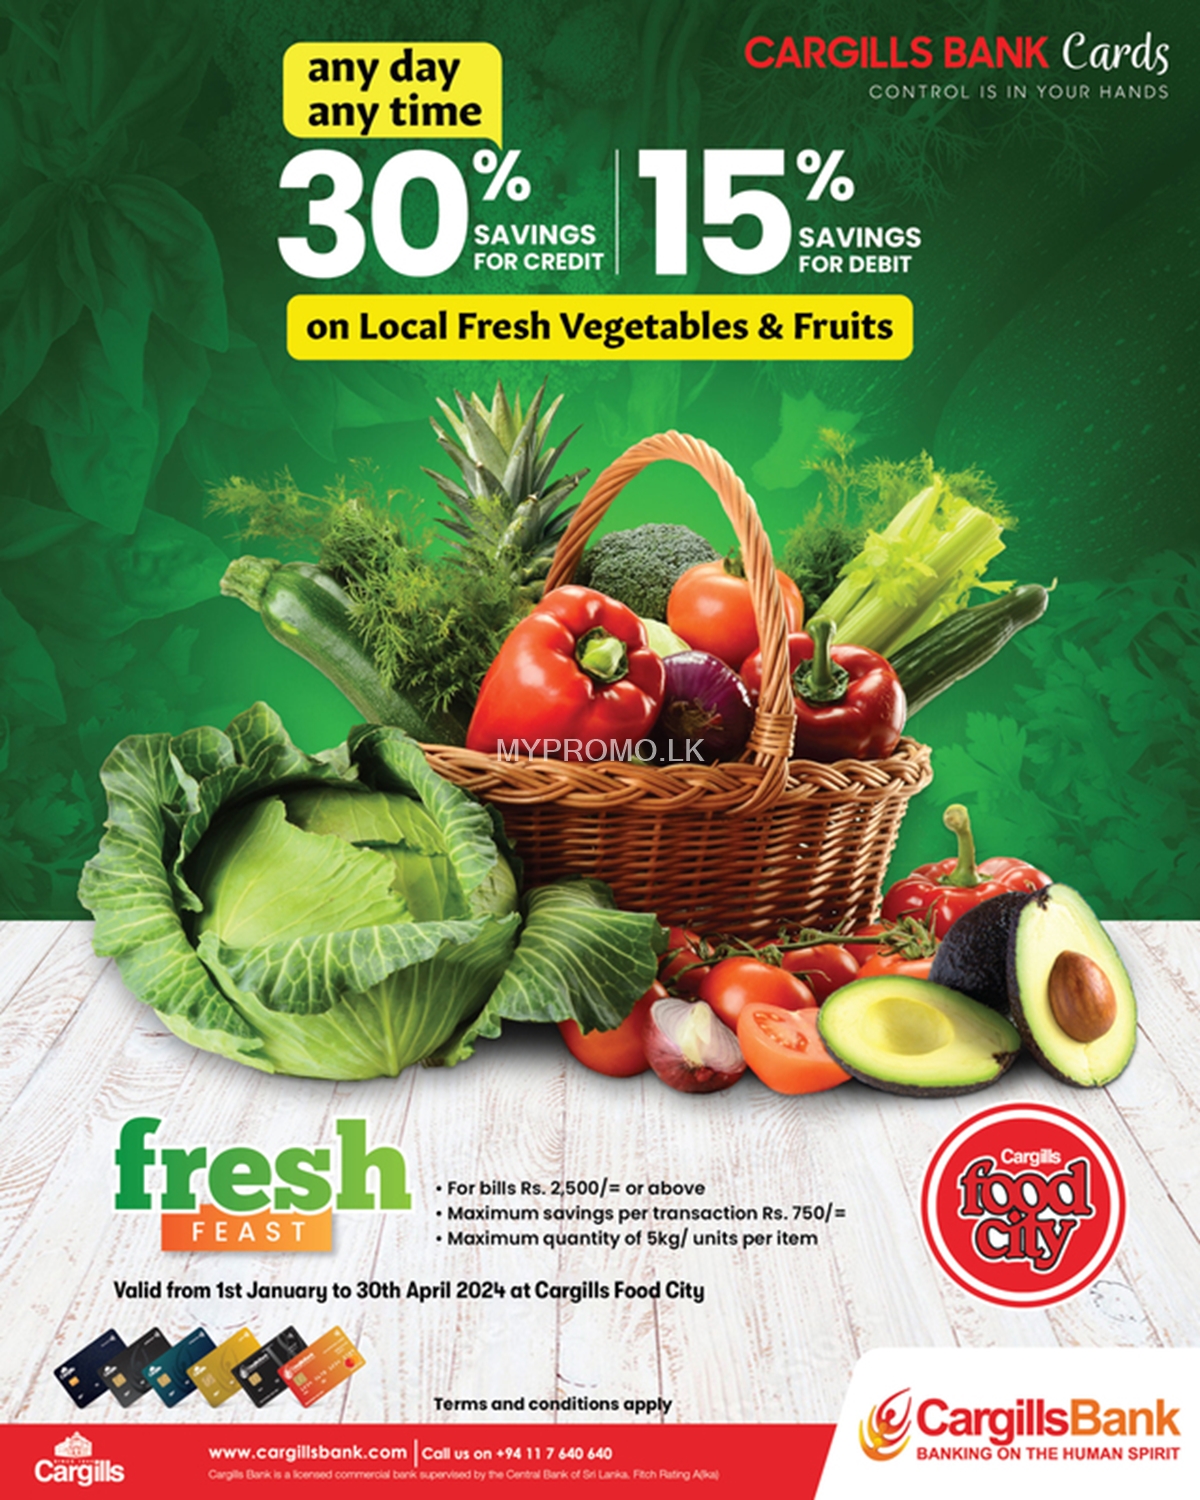 Enjoy up 30% Savings on Local Fresh Vegetables and Fruits with Cargills Bank Cards at Cargills Food City